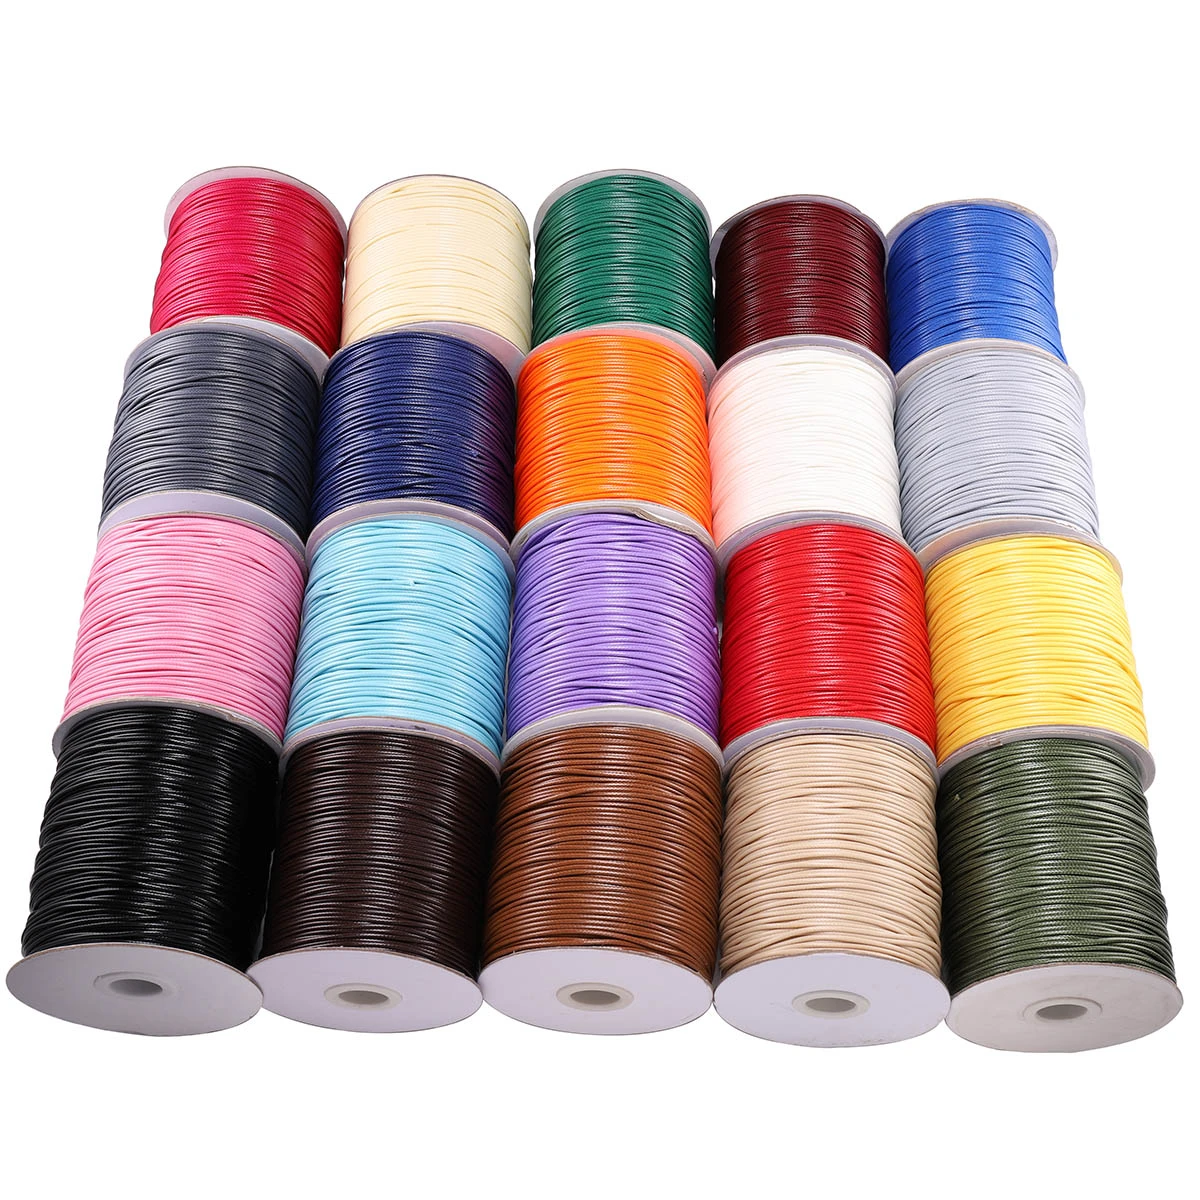 10m/lot 22 Color Leather Line Waxed Cord Cotton Thread String Strap Necklace Rope For Jewelry Making DIY Bracelet Supplies